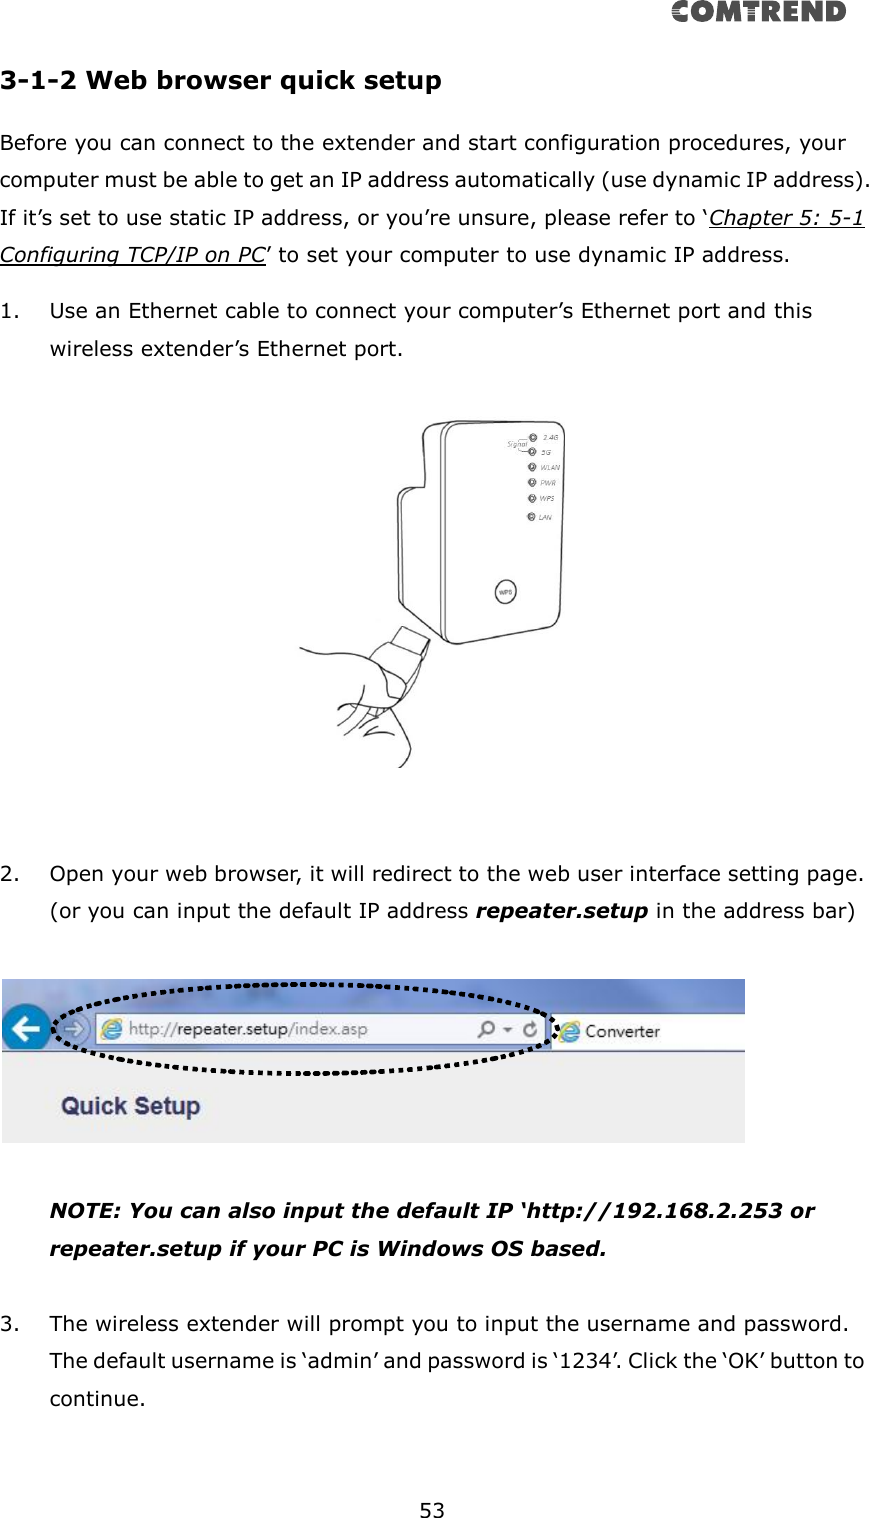       53  3-1-2 Web browser quick setup Before you can connect to the extender and start configuration procedures, your computer must be able to get an IP address automatically (use dynamic IP address). If it’s set to use static IP address, or you’re unsure, please refer to ‘Chapter 5: 5-1 Configuring TCP/IP on PC’ to set your computer to use dynamic IP address. 1. Use an Ethernet cable to connect your computer’s Ethernet port and this wireless extender’s Ethernet port.     2. Open your web browser, it will redirect to the web user interface setting page. (or you can input the default IP address repeater.setup in the address bar)    NOTE: You can also input the default IP ‘http://192.168.2.253 or repeater.setup if your PC is Windows OS based.  3. The wireless extender will prompt you to input the username and password. The default username is ‘admin’ and password is ‘1234’. Click the ‘OK’ button to continue.  